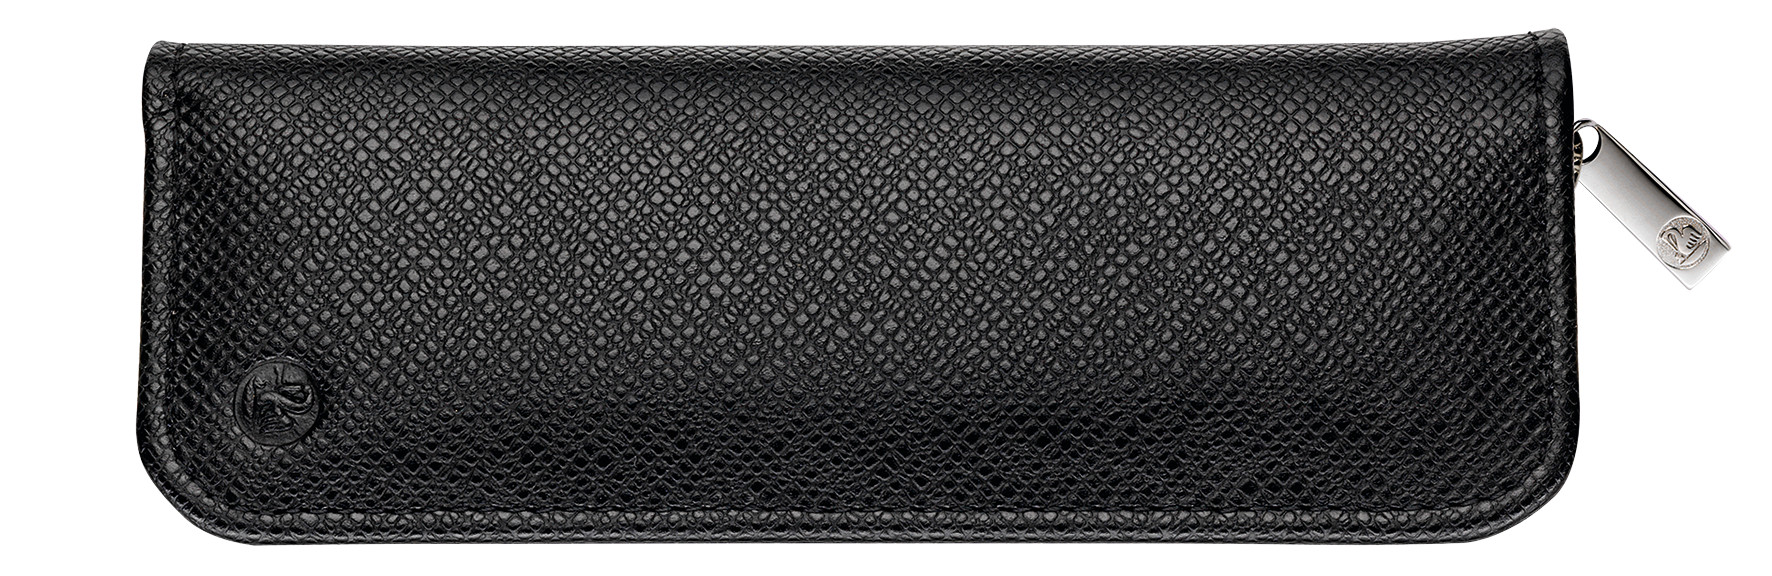 Pelikan Pencil Case Made of Grained Leather TGX2E for Two Writing Instruments, Black